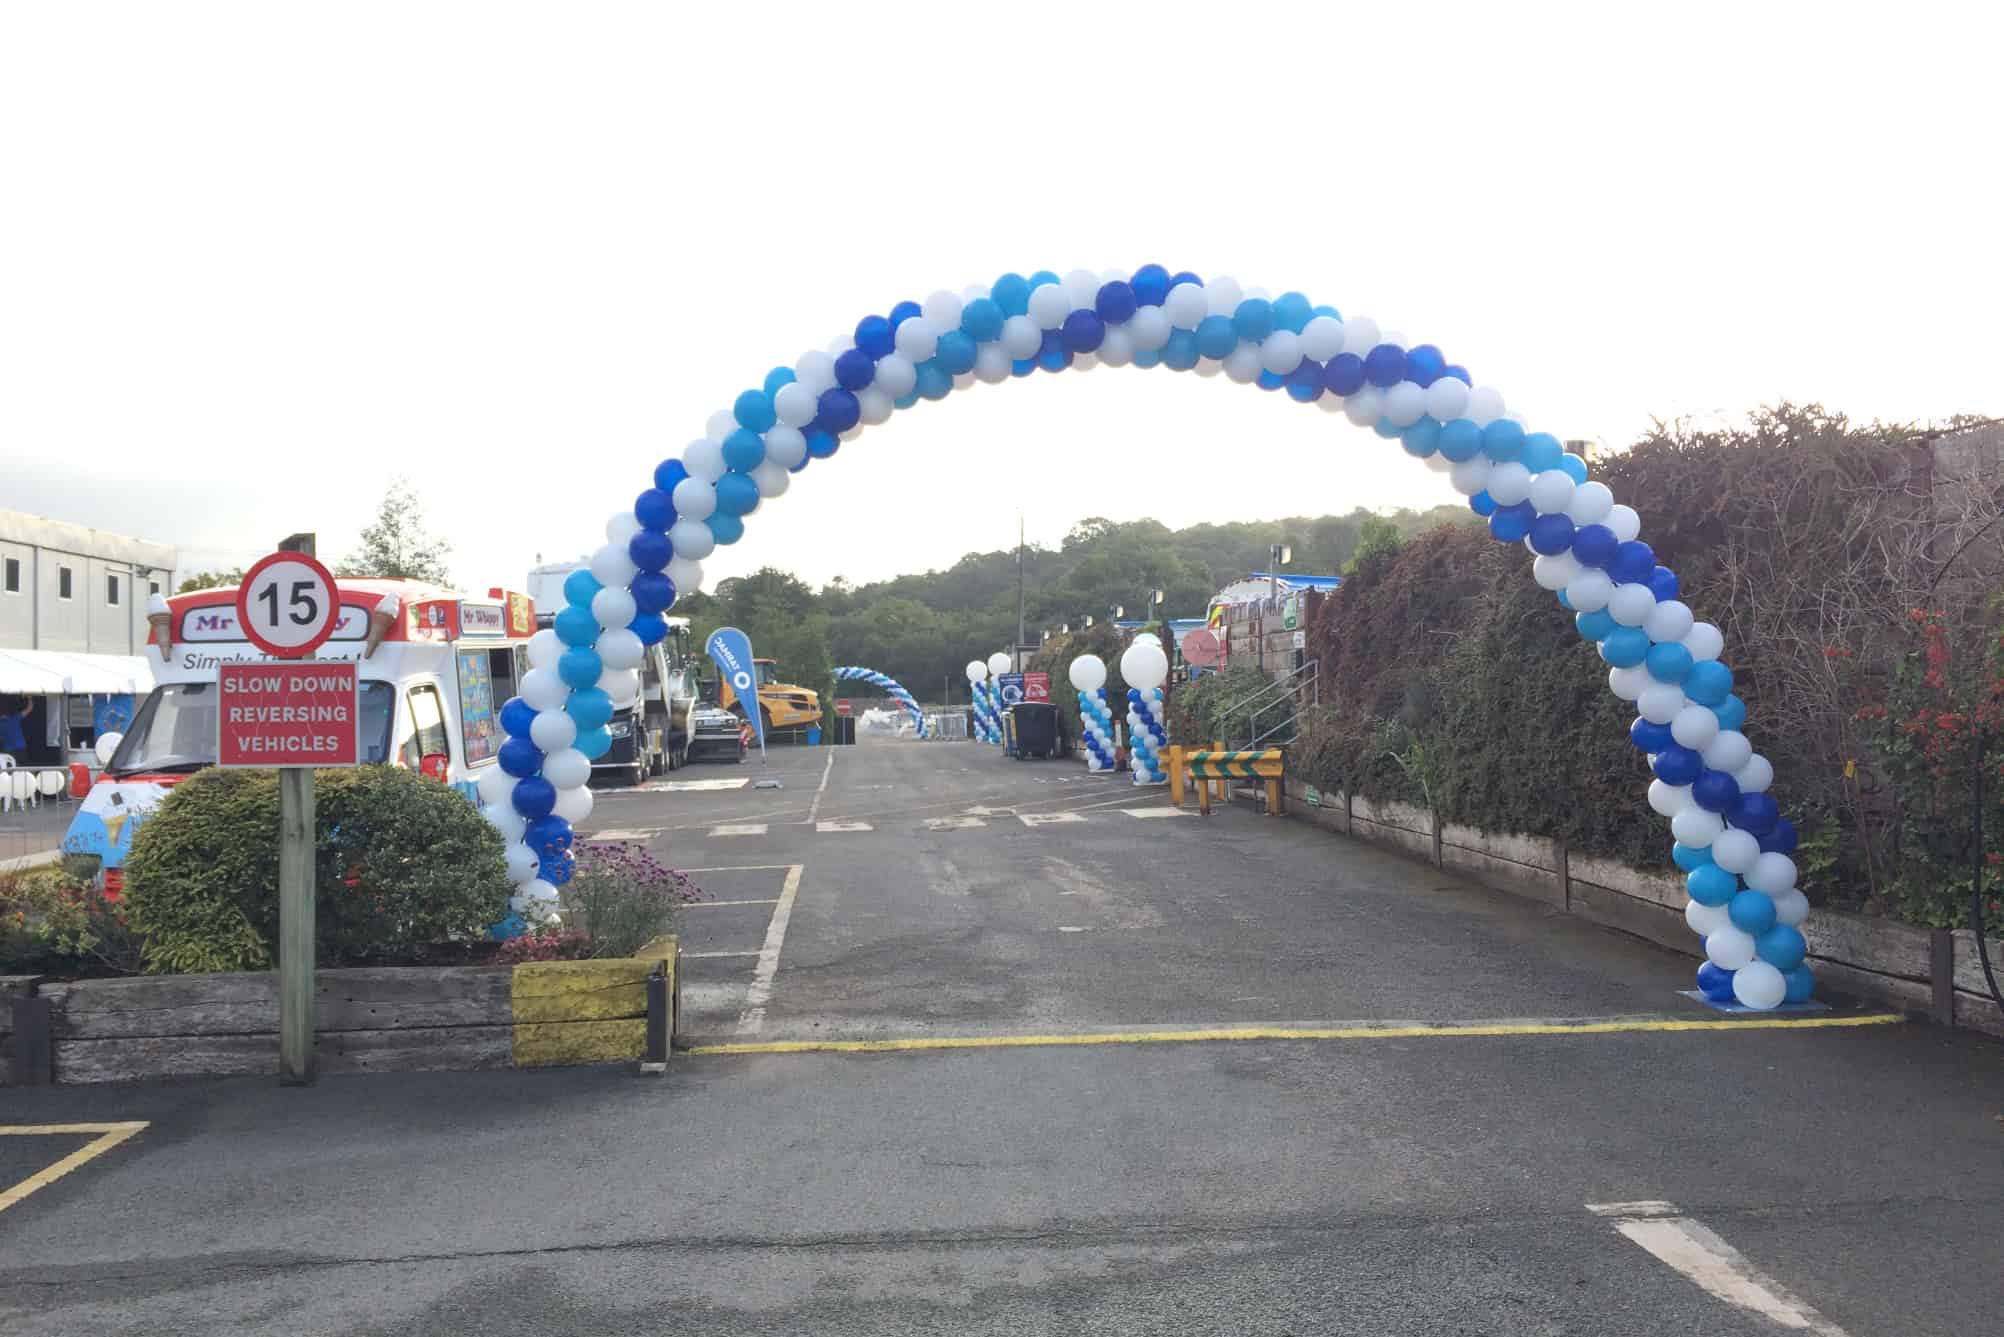 Blue balloon archway at an event